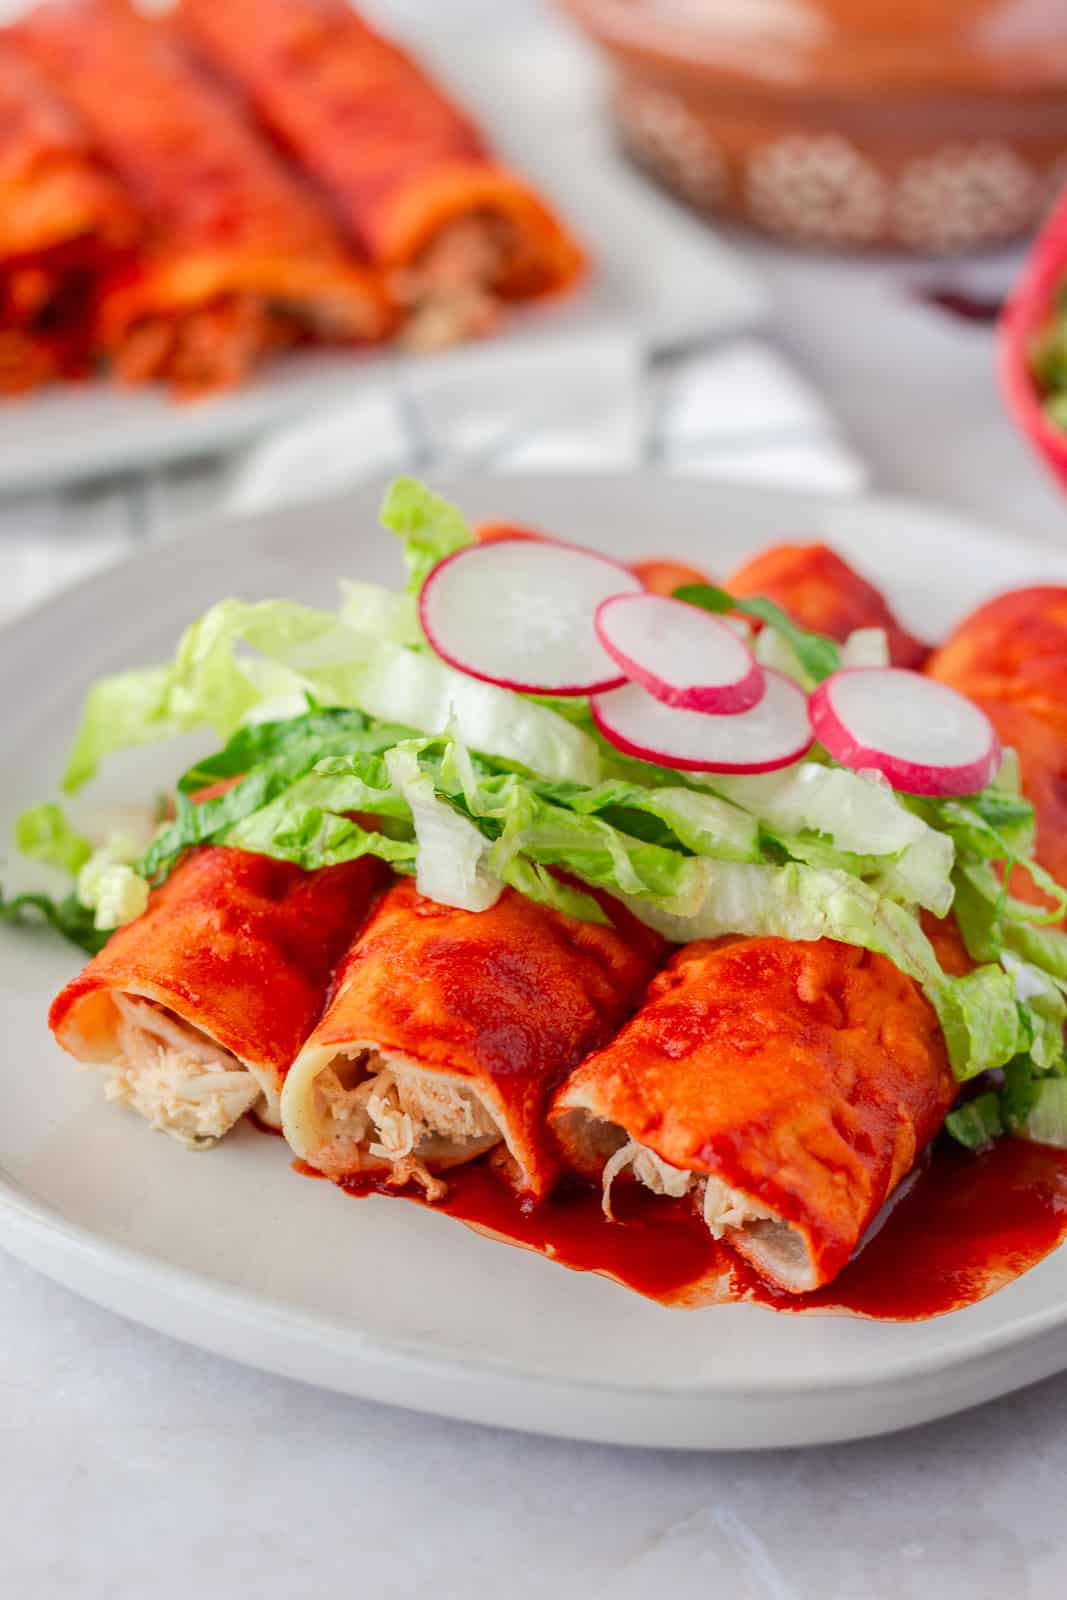 Enchiladas rojas on a plate filled with chicken and toppings.